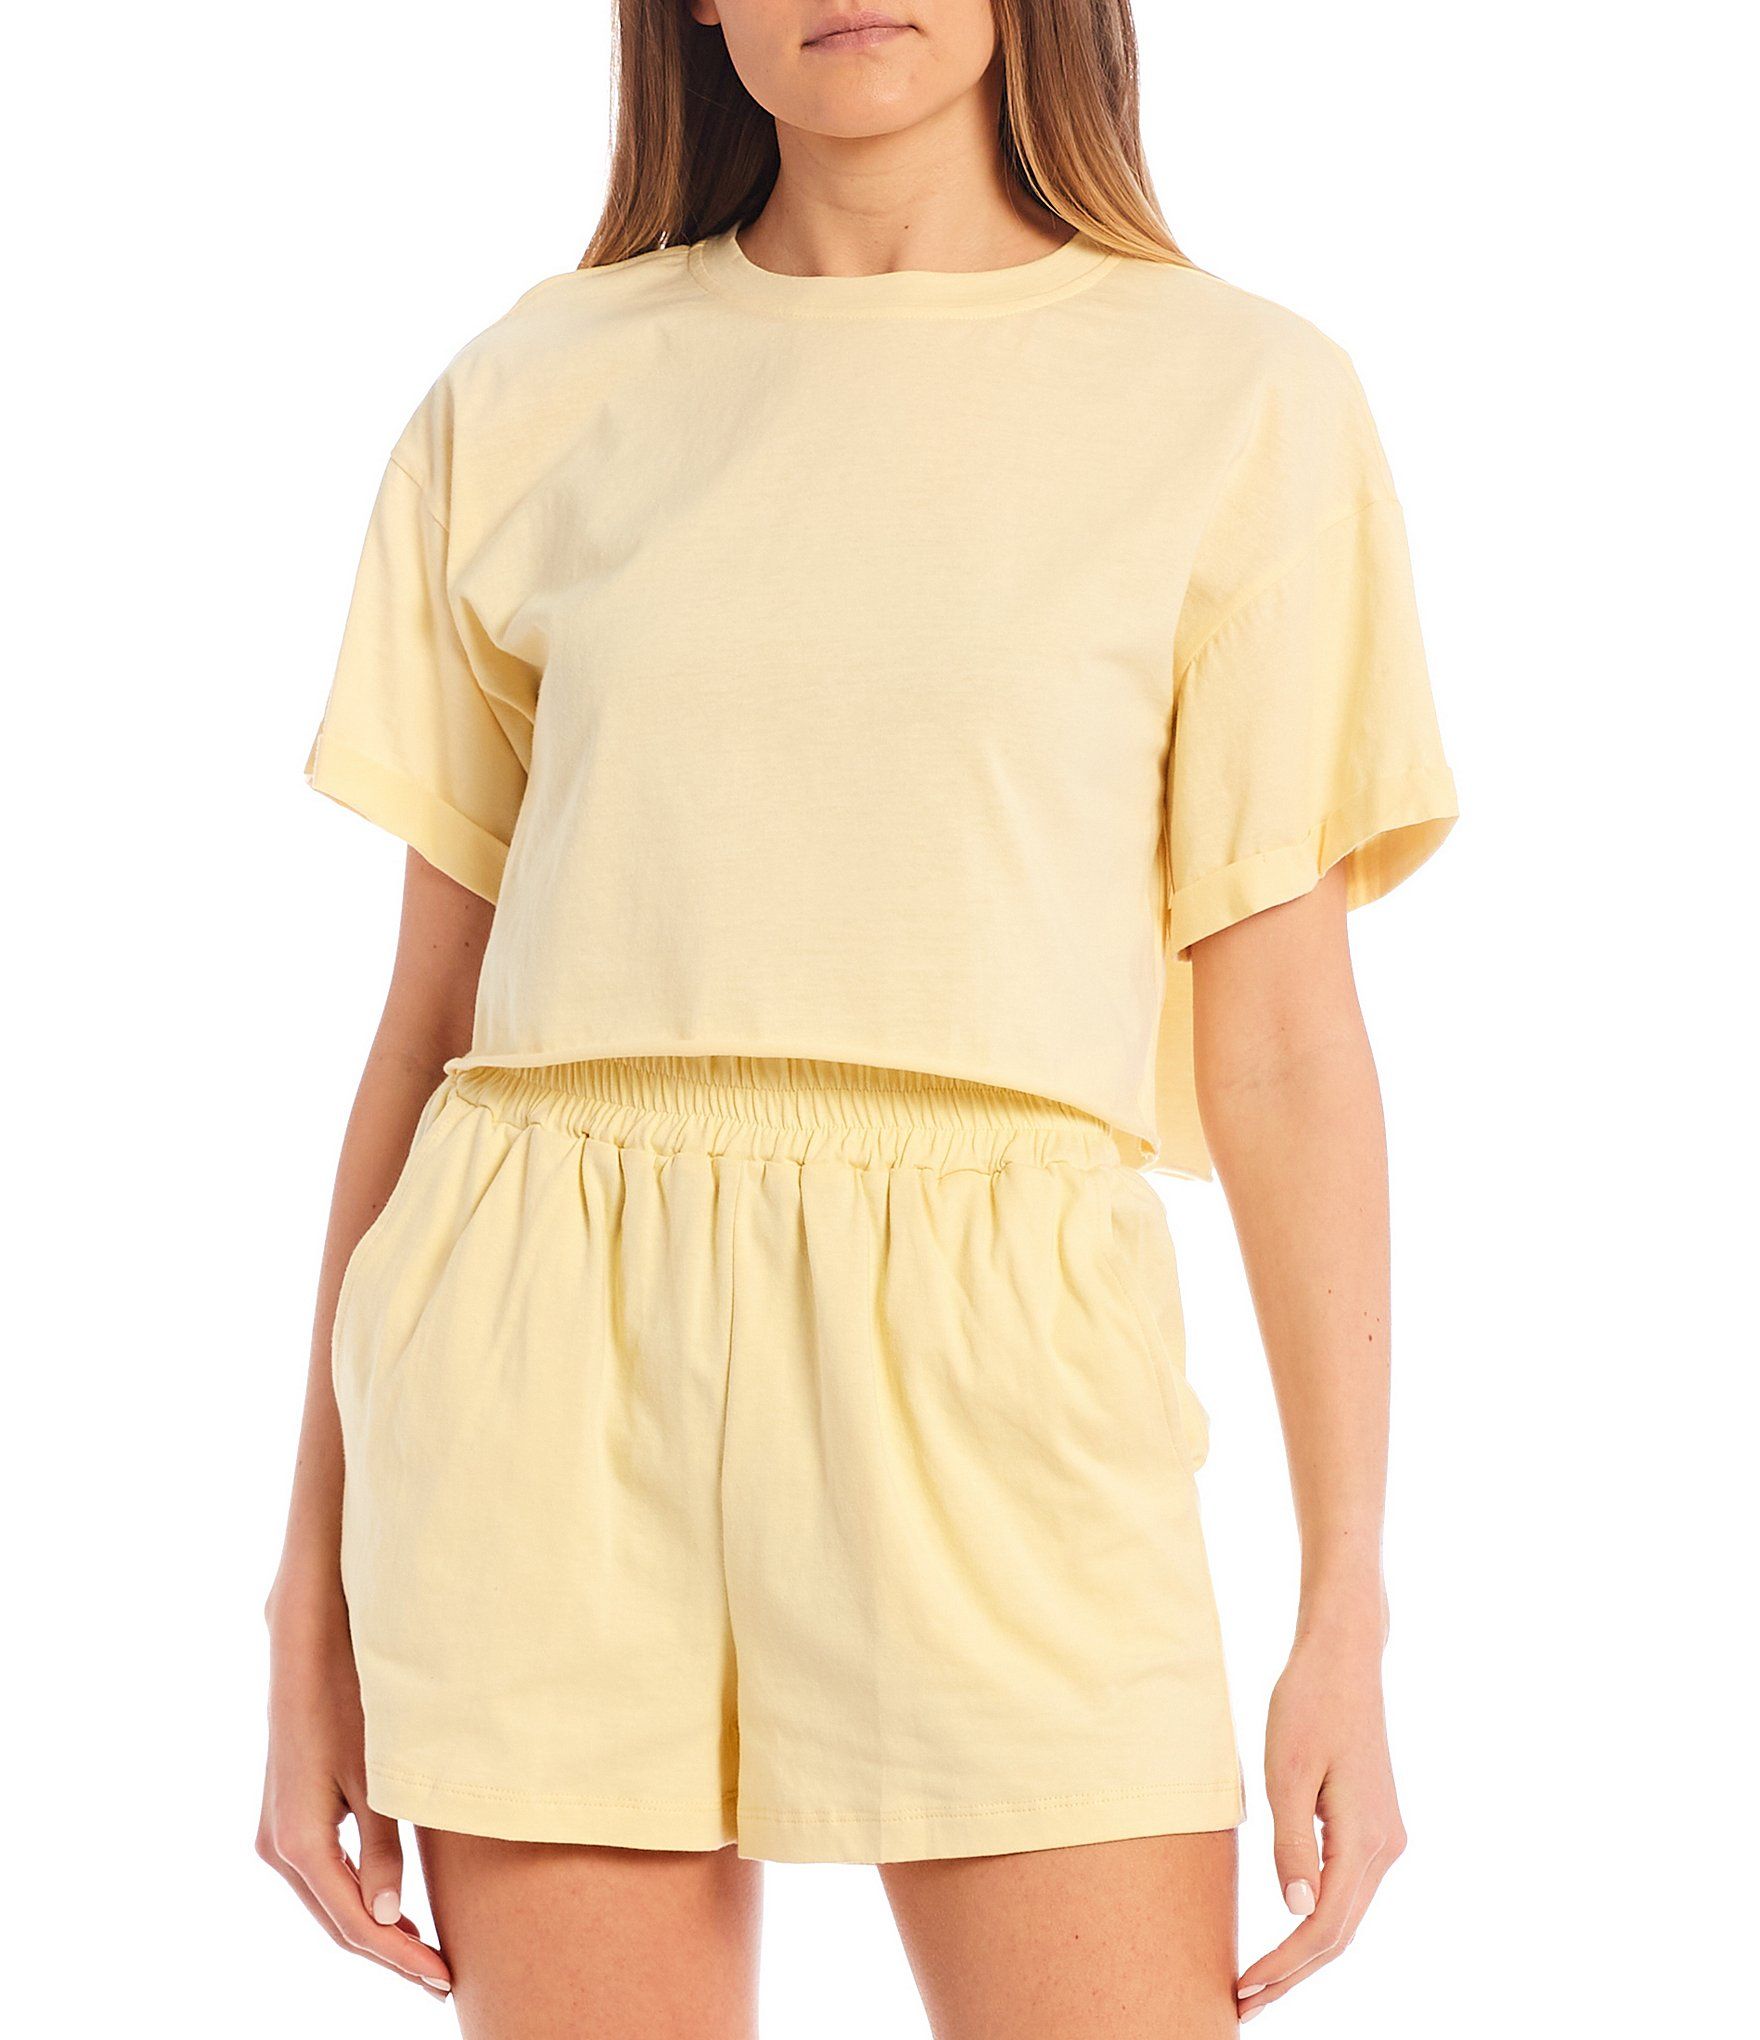 Coordinating Rolled Cuff Short Sleeve Cropped Tee | Dillards